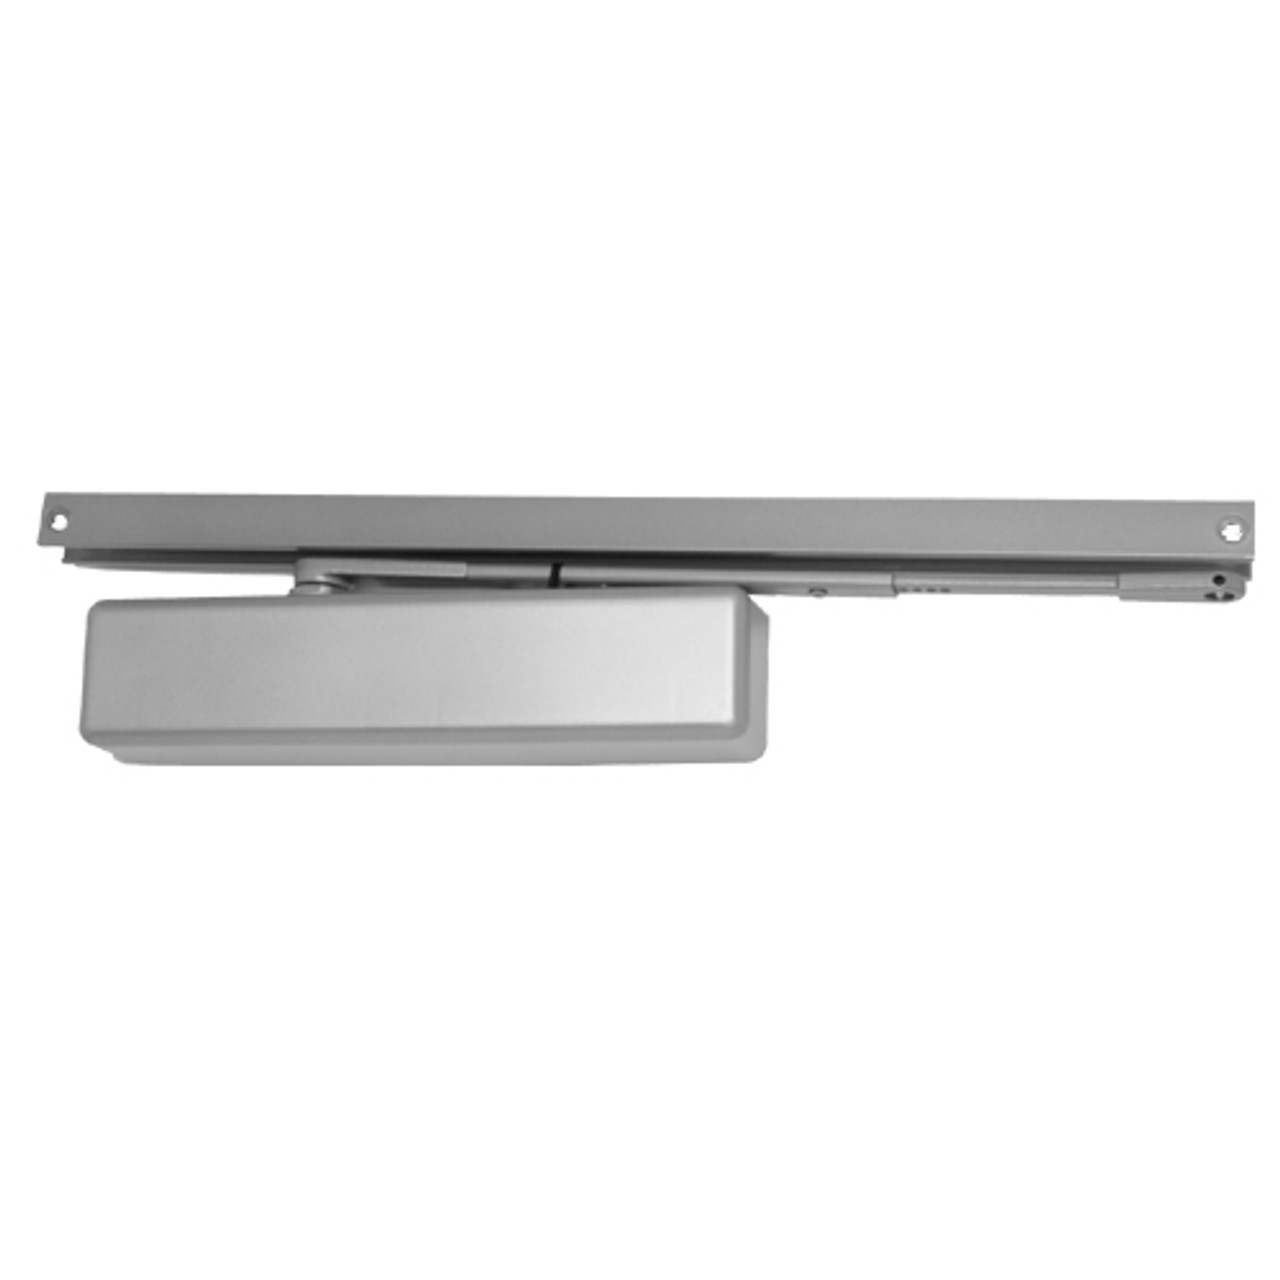 1460T-H-AL-DS LCN Surface Mount Door Closer with Hold Open Arm in Aluminum Finish